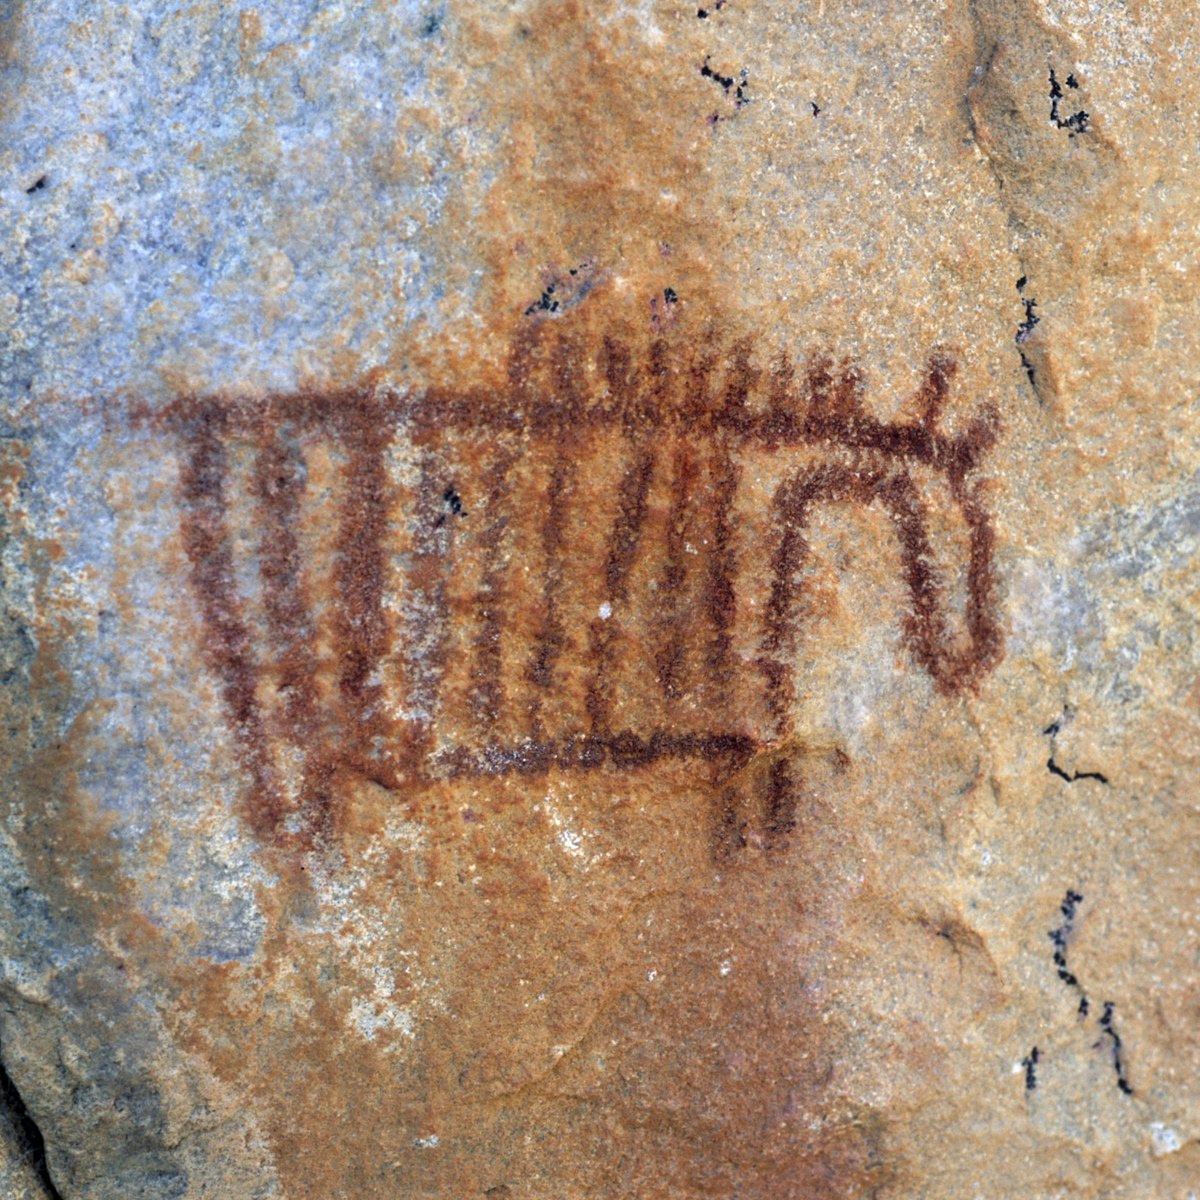 Rock art, zebra on a small outcrop, now used as the logo of Botswana's National Museums and Monuments, Tsodilo Hills, UNESCO World Heritage Site, Ngamiland, Botswana, Africa